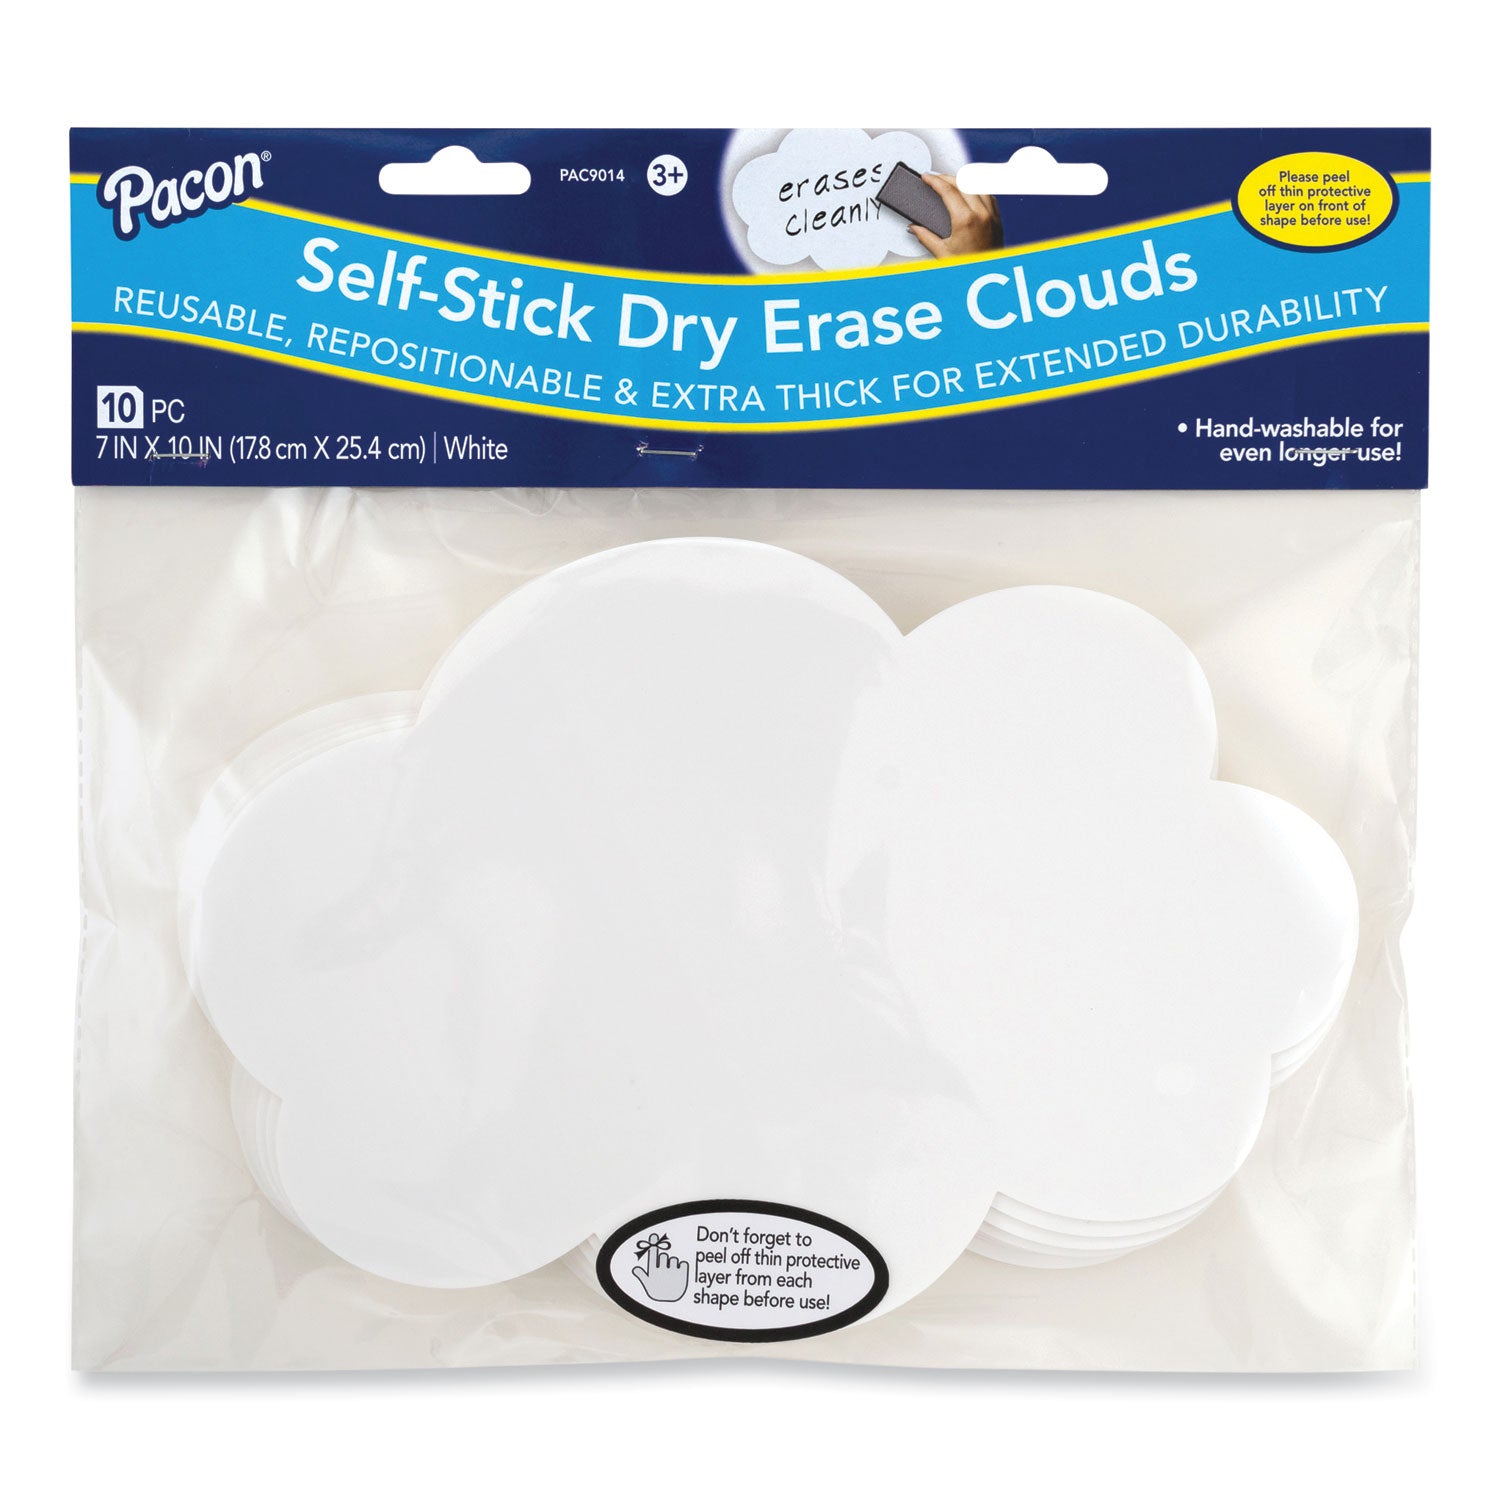 self-stick-dry-erase-clouds-7-x-10-white-surface-10-pack_pac9014 - 2